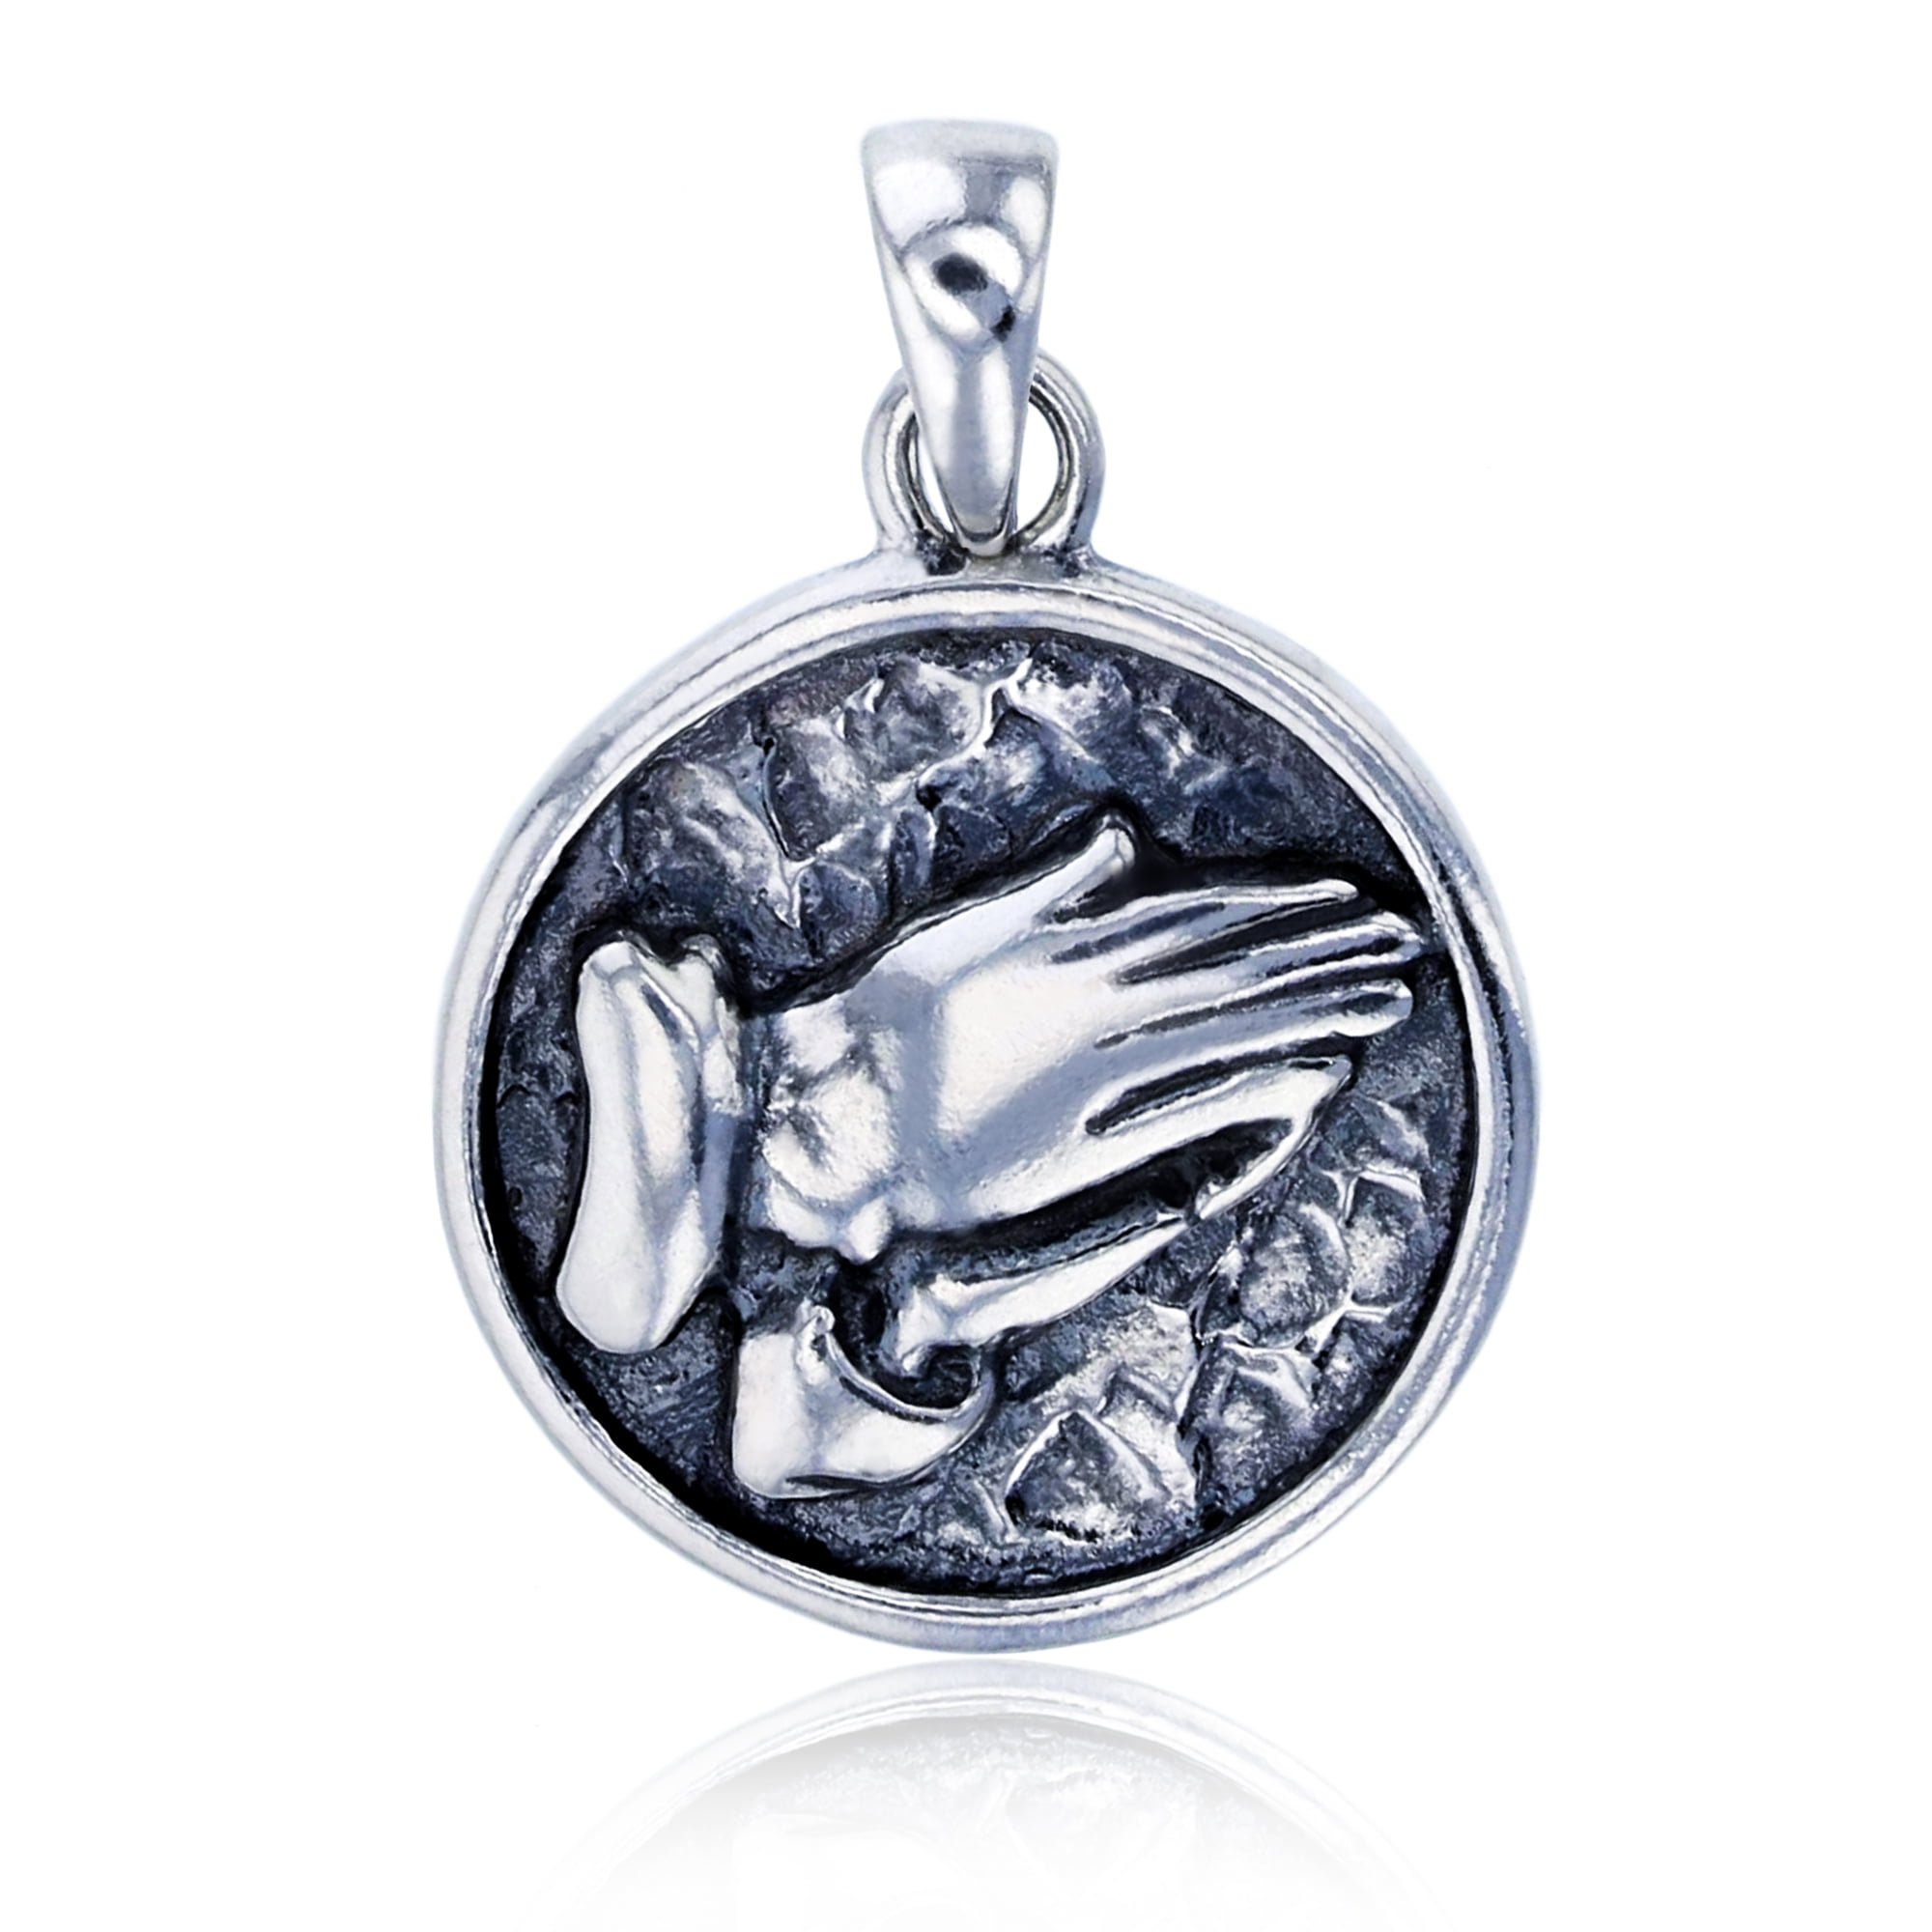 Details about   Polished Rhodium Plated 925 Sterling Silver Buddha Charm 